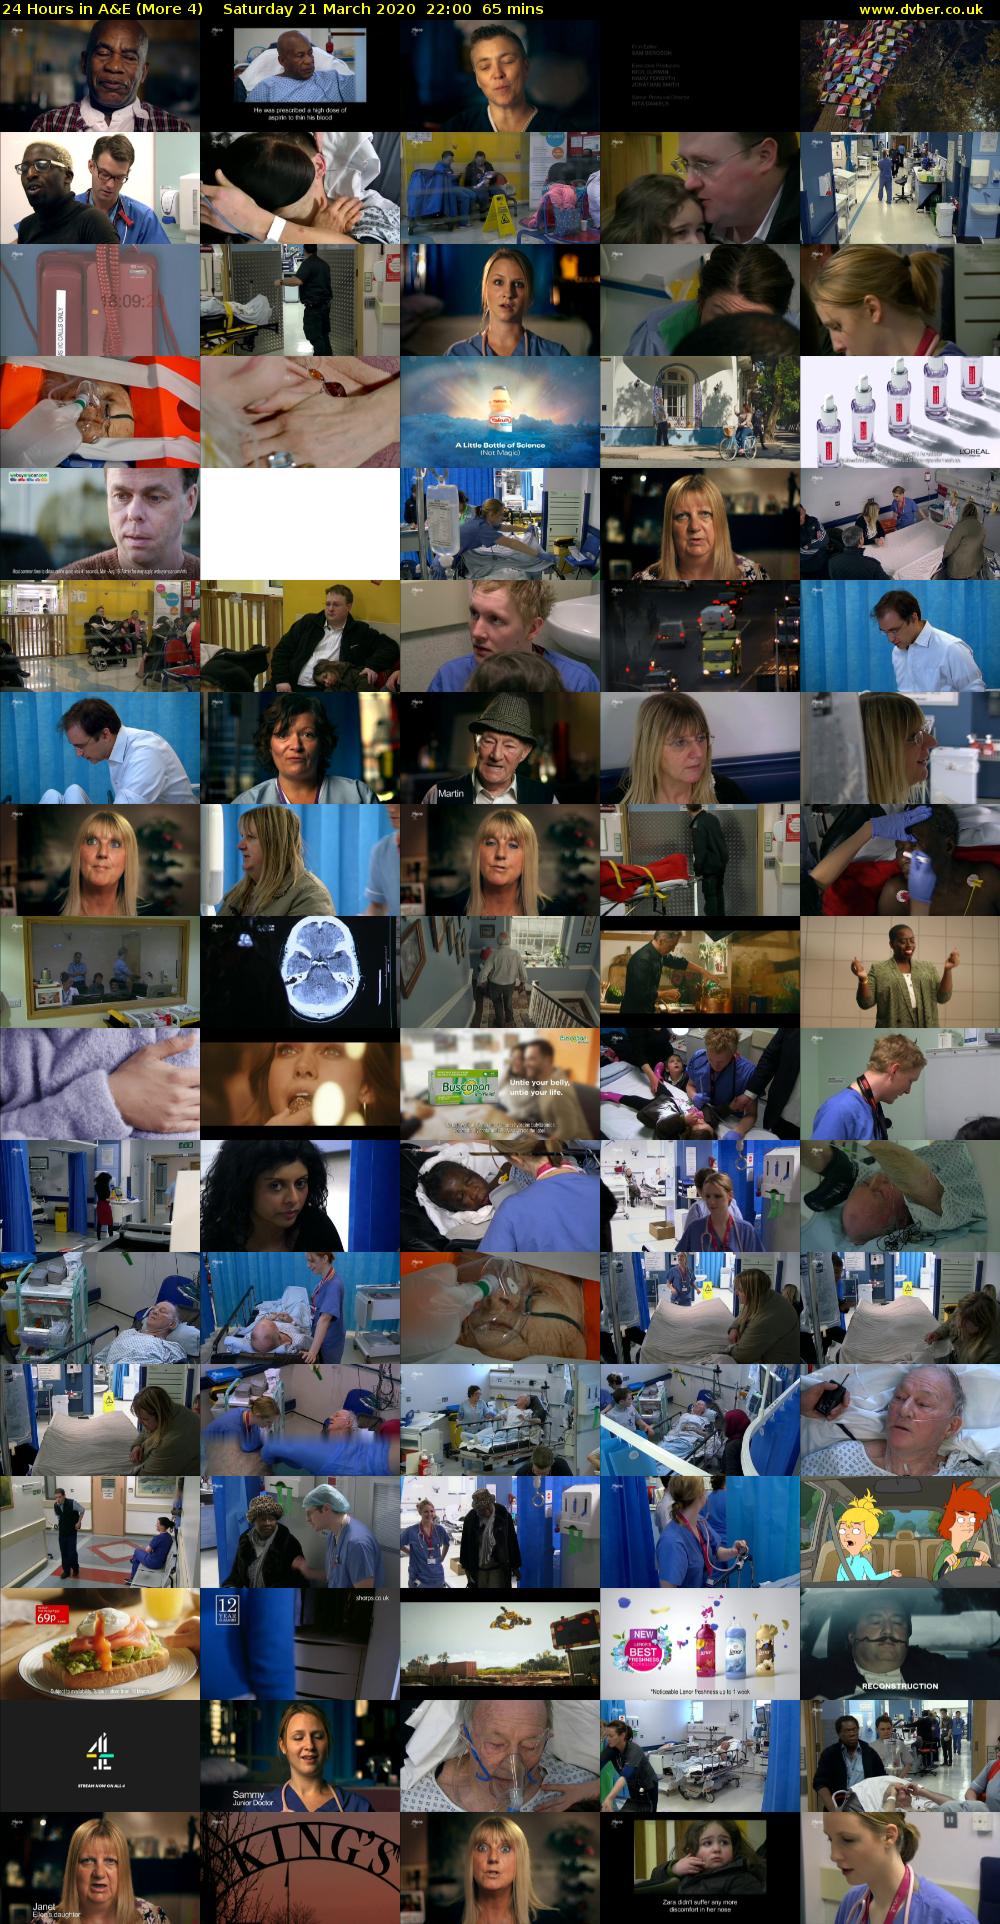 24 Hours in A&E (More 4) Saturday 21 March 2020 22:00 - 23:05